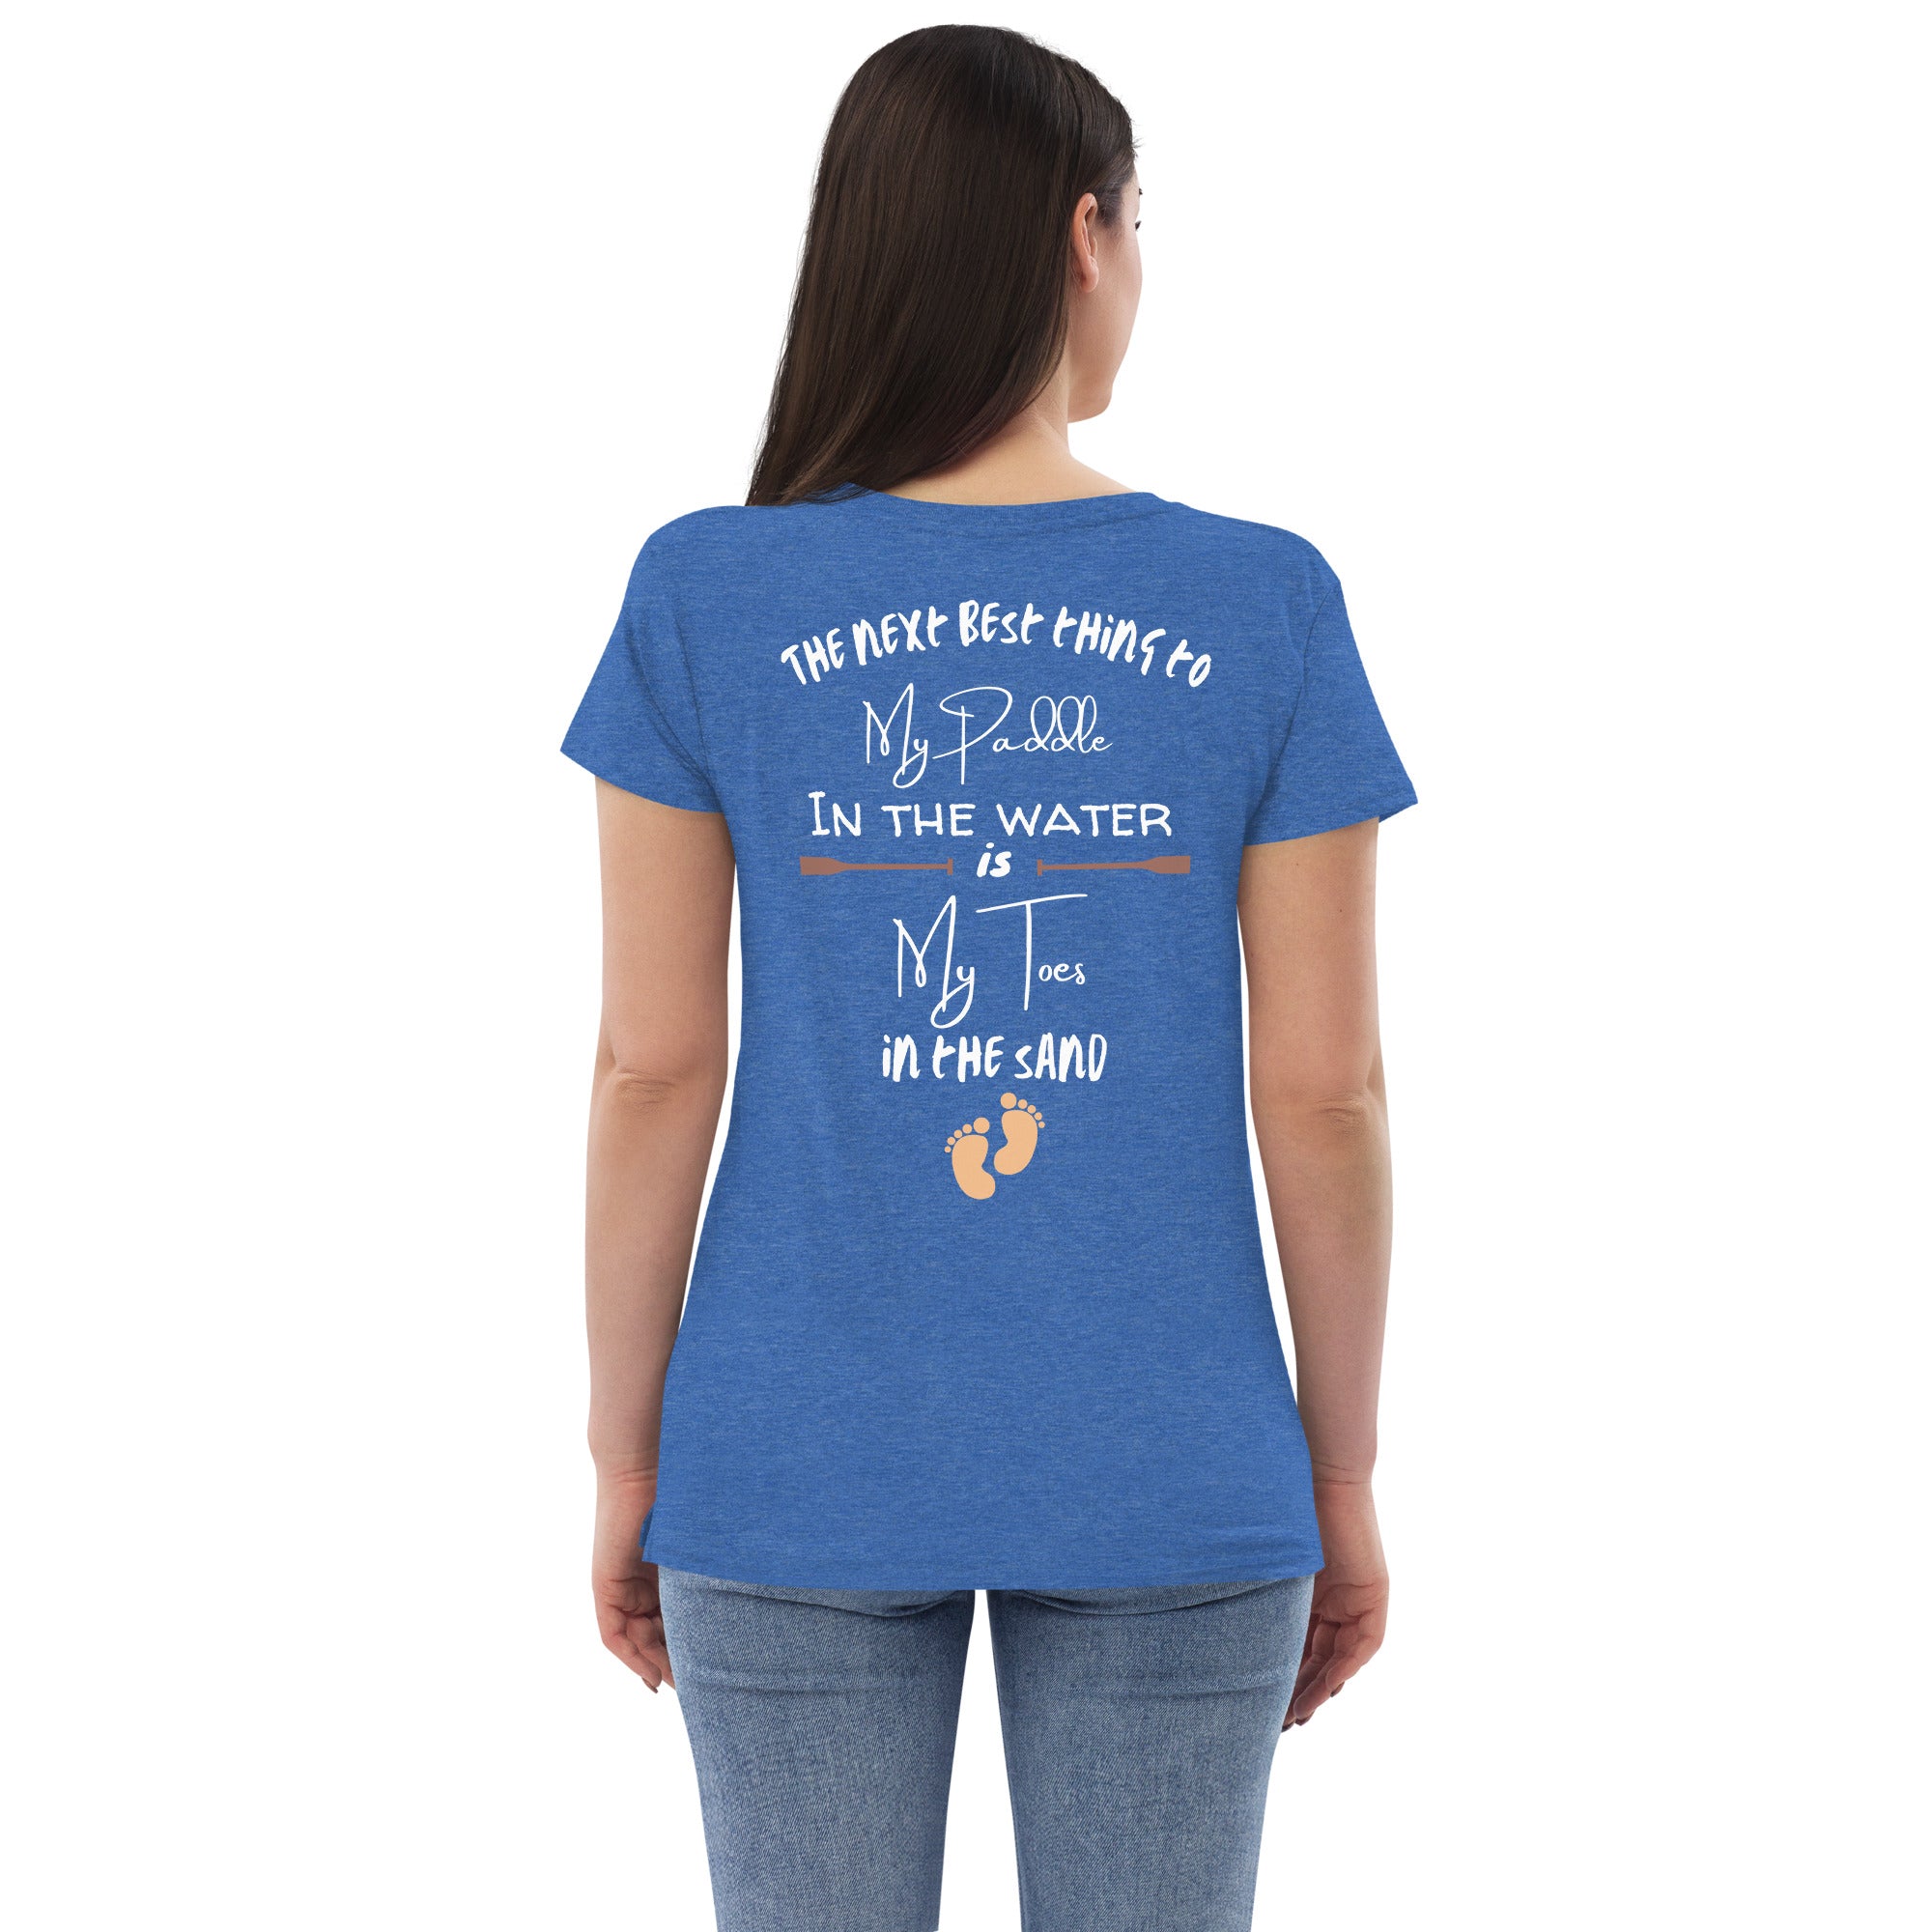 Women’s recycled v-neck t-shirt - My Toes in the Sand